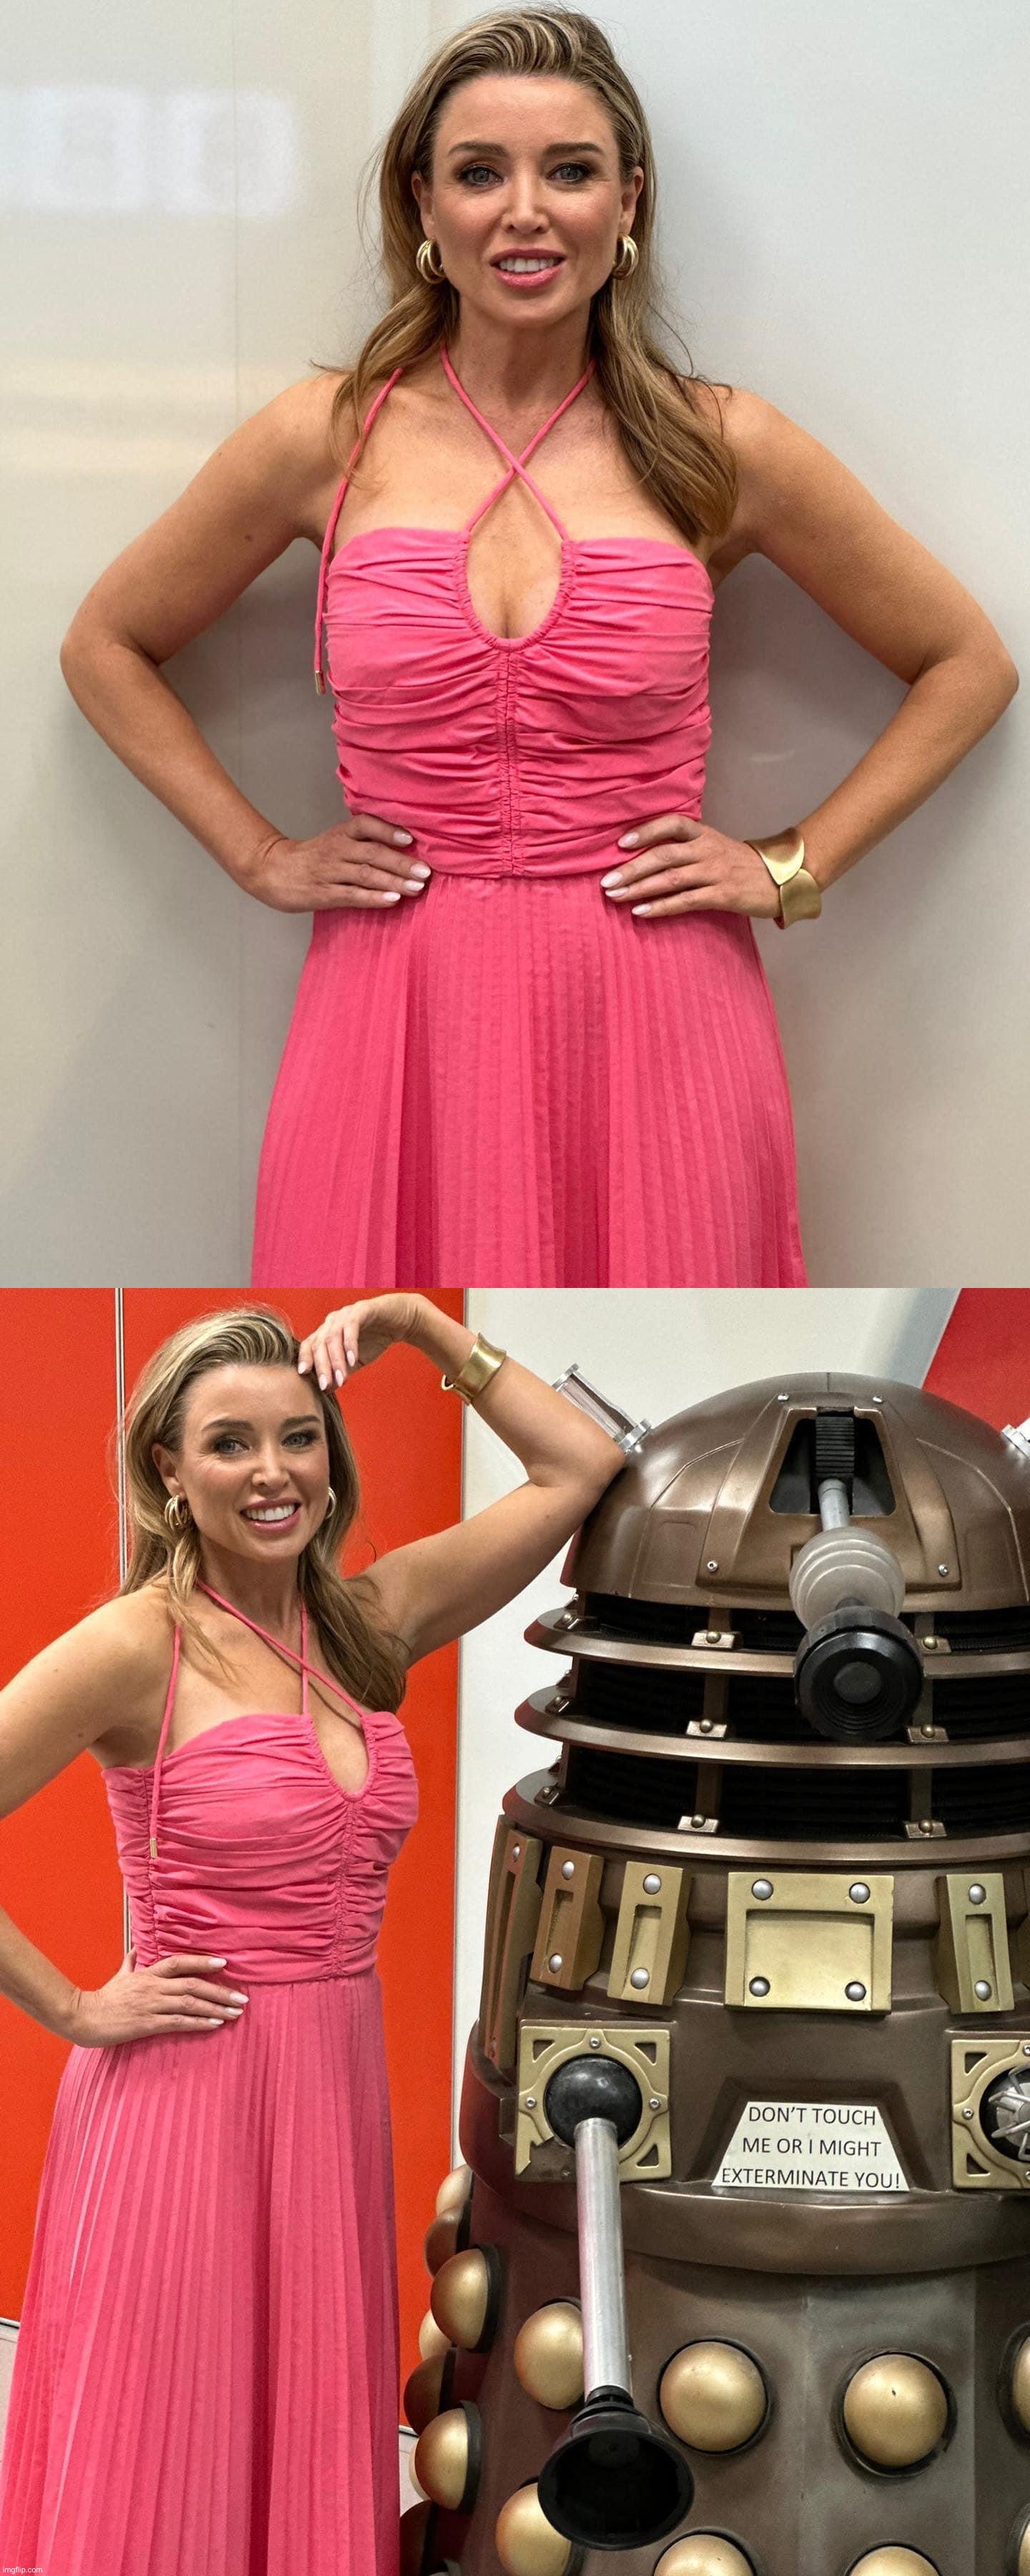 image tagged in dannii minogue,dannii minogue and dalek | made w/ Imgflip meme maker